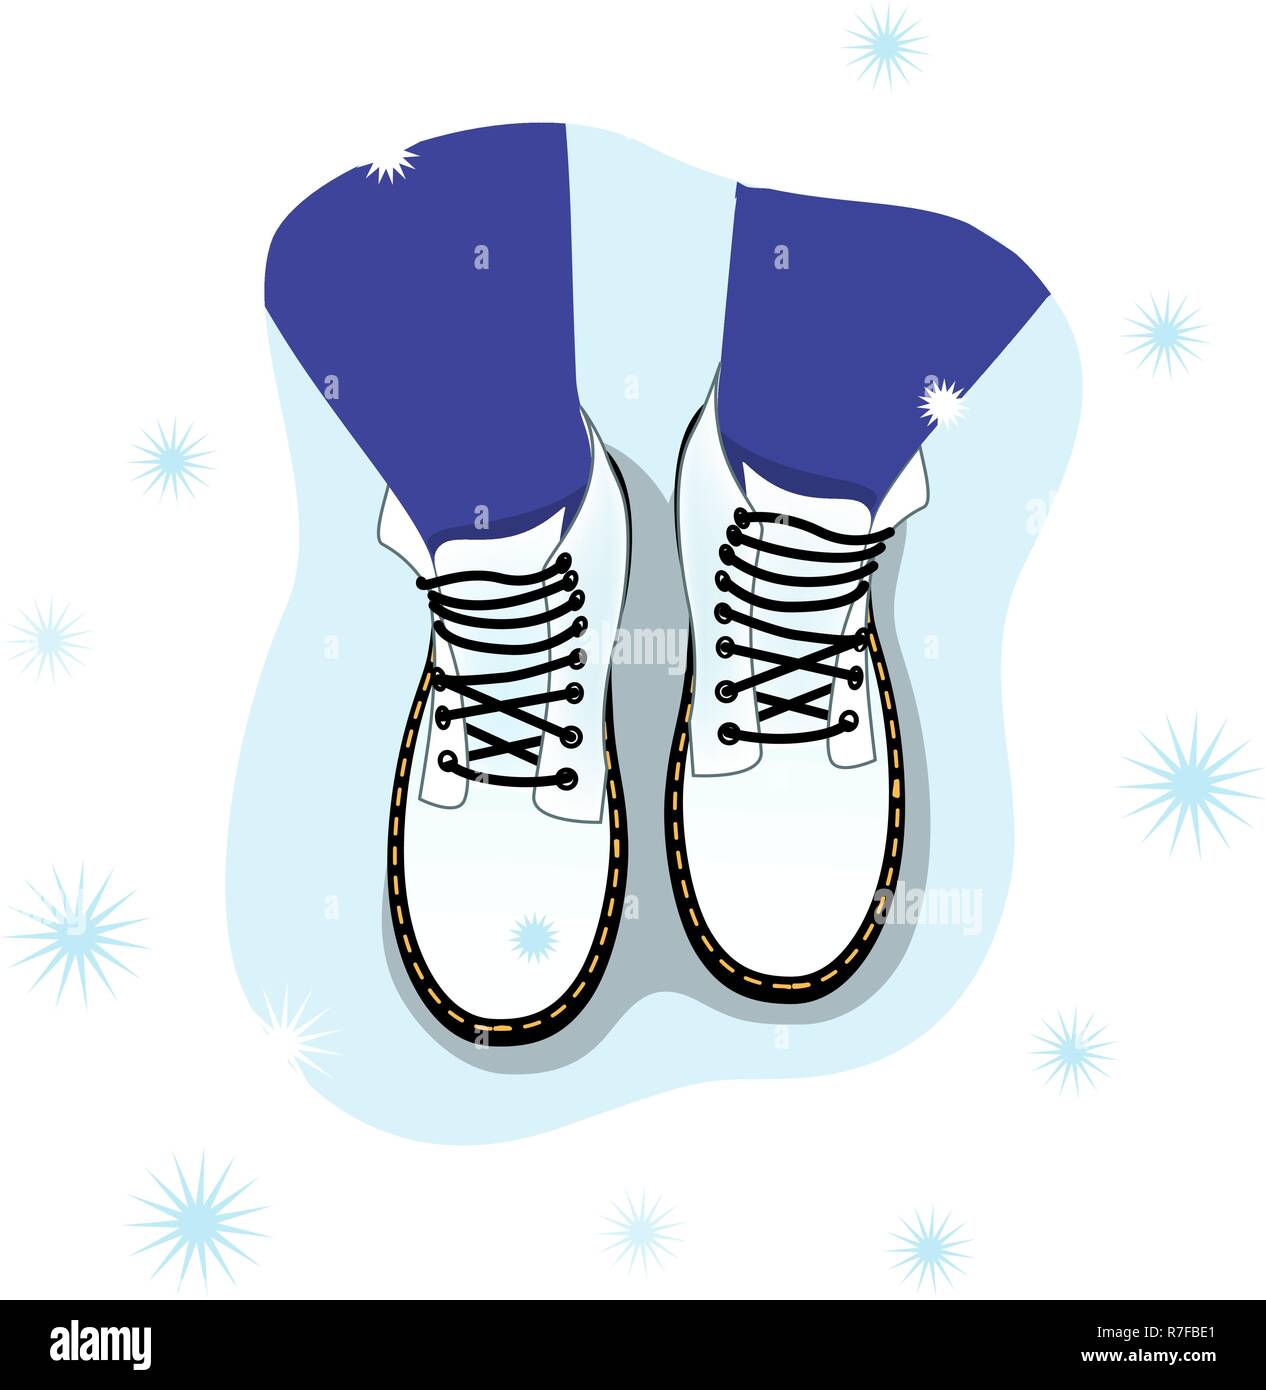 Vector illustration of the top view of the female legs in boots on the snow. Stock Vector